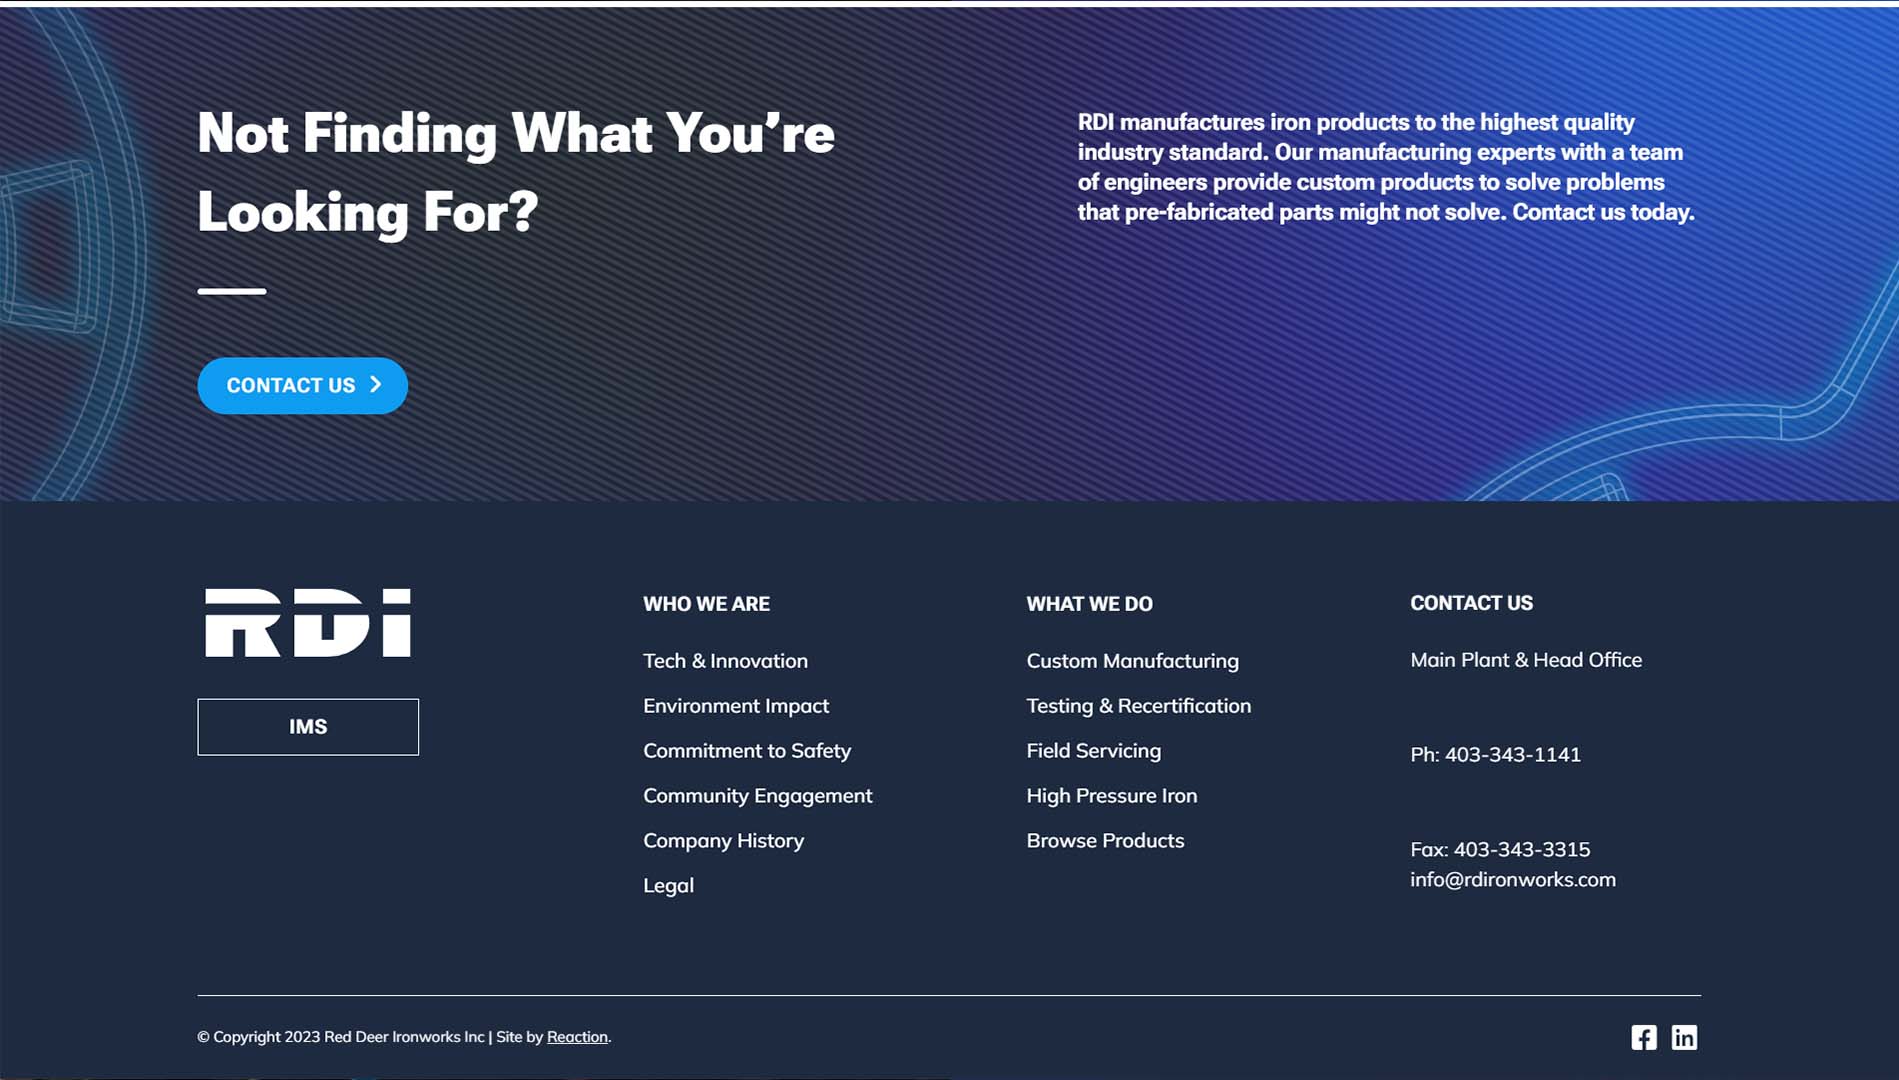 Footer section of the RDI website with a call-to-action 'Not Finding What You're Looking For?' encouraging contact, overlaid on a dark blue background with wireframe graphics, alongside contact information, company sections, and social media links, emphasizing customer support and accessibility.